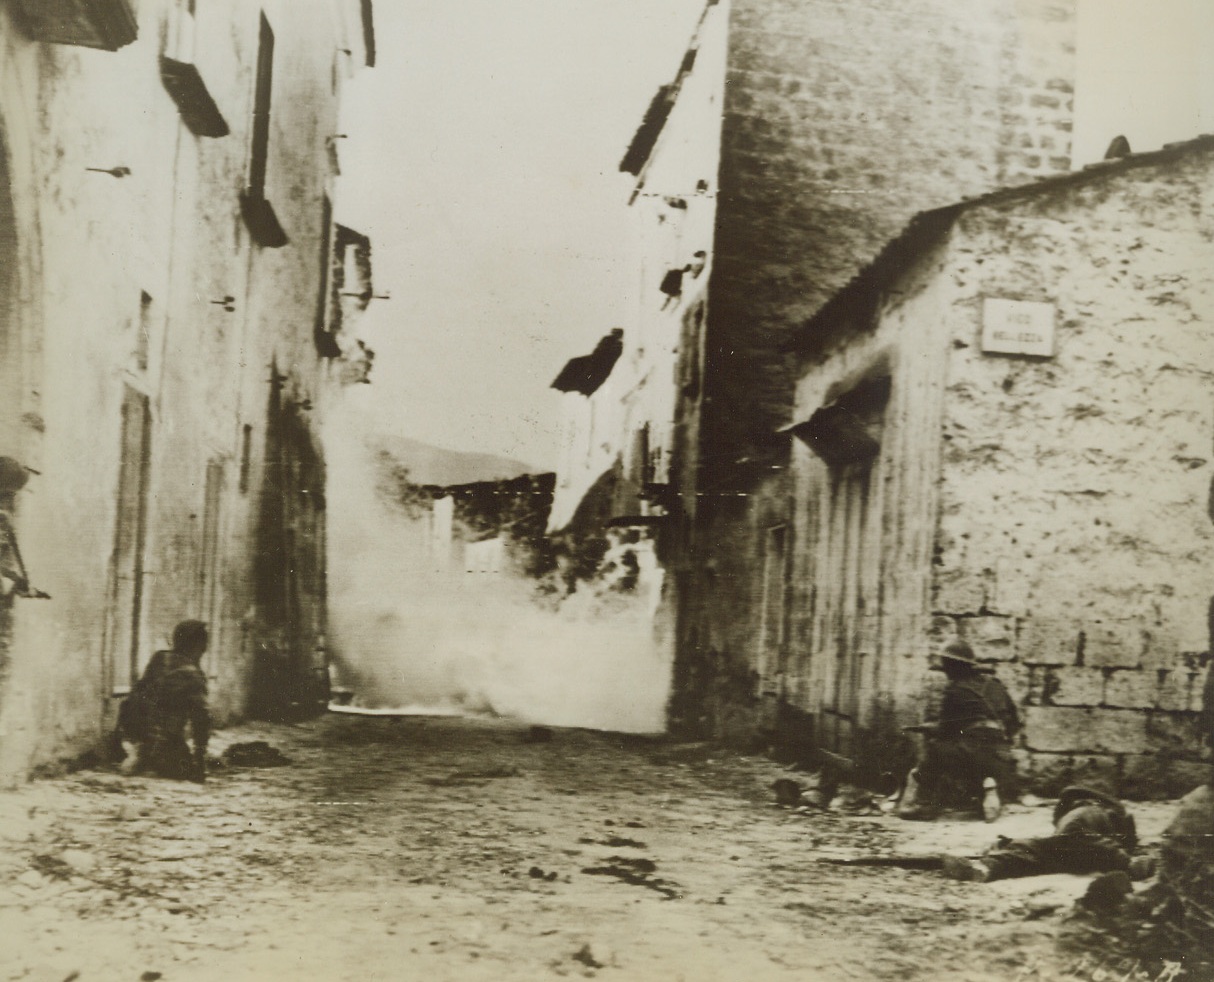 Good Day to Stay Indoors, 11/6/1943. ITALY—Bullets fly thick and fast as members of a British patrol seek out the enemy in some furious street fighting in Nocelleto, Italy. Credit: ACME photo via SIGNAL CORPS RADIOTELEPHOTO.;